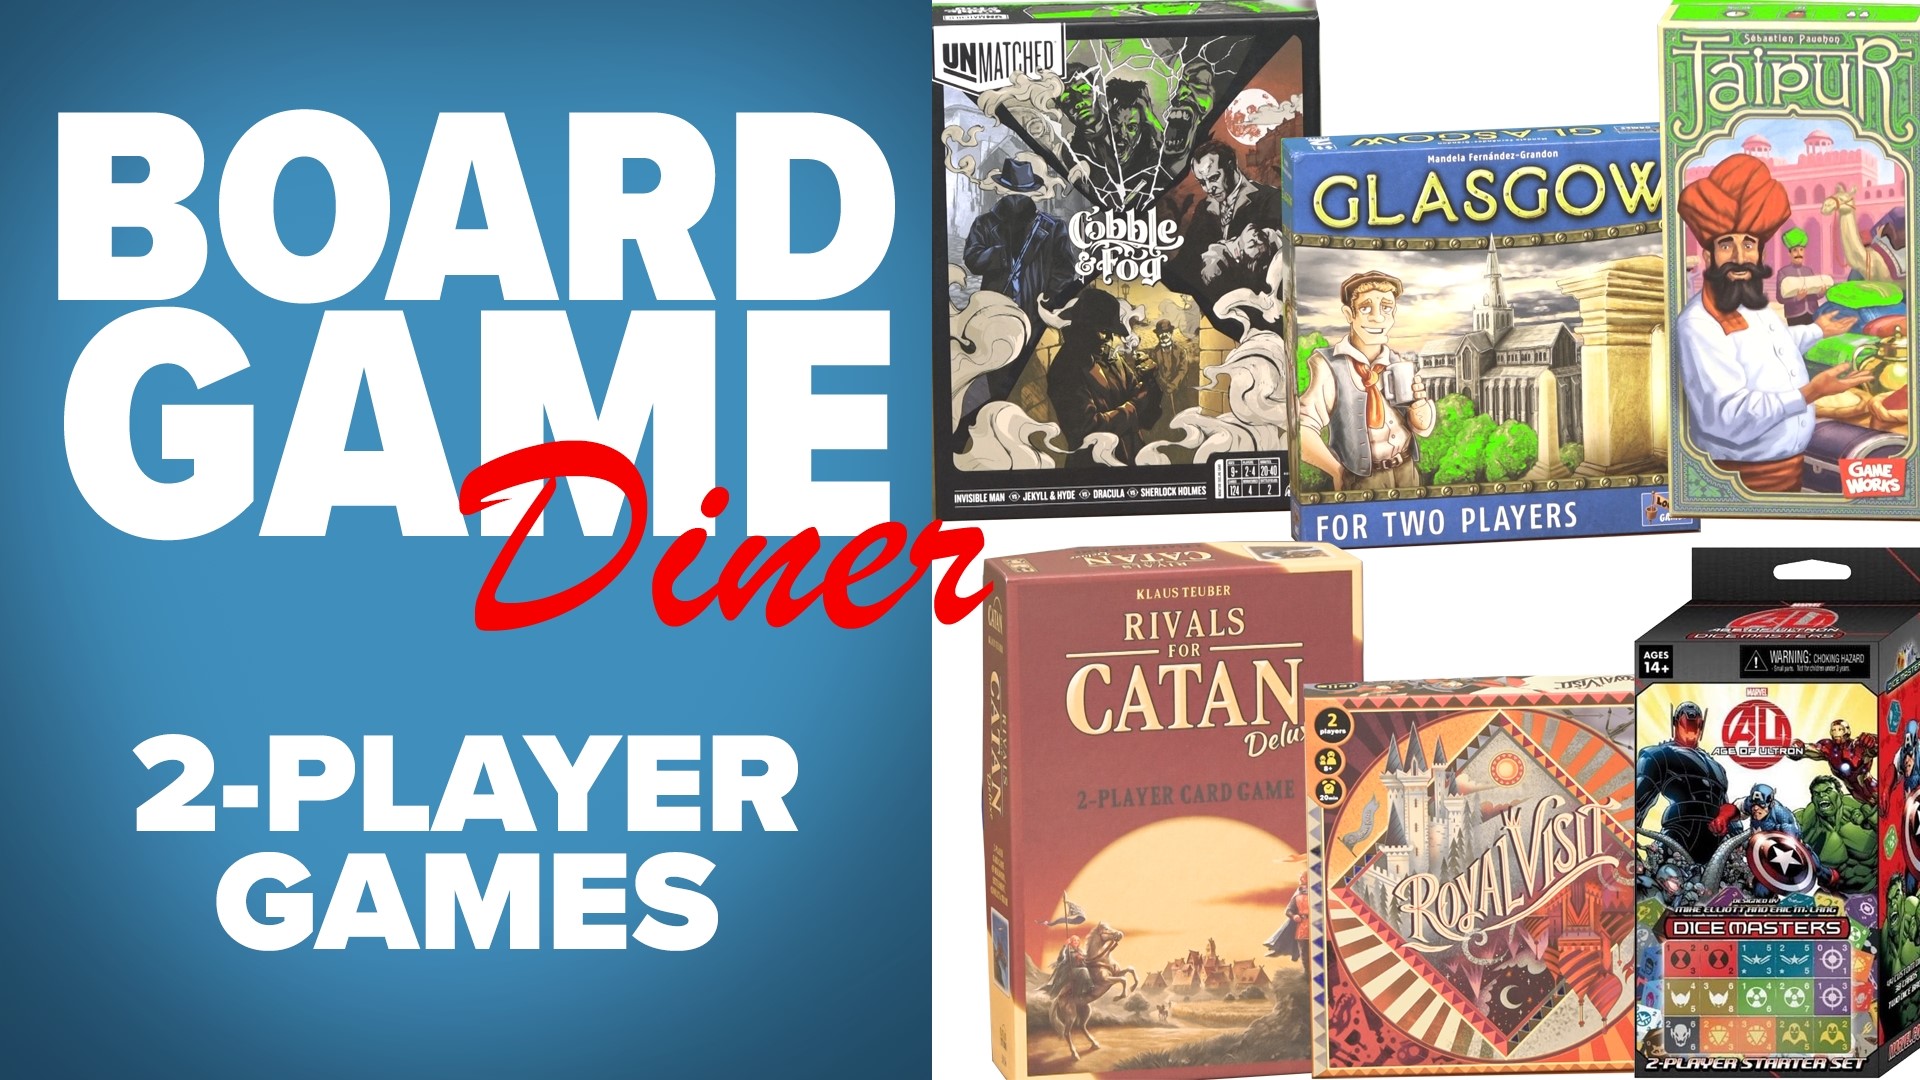 When it's just you and that other person going head-to-head, try some of these games. Discover some new games to play with friends and family.